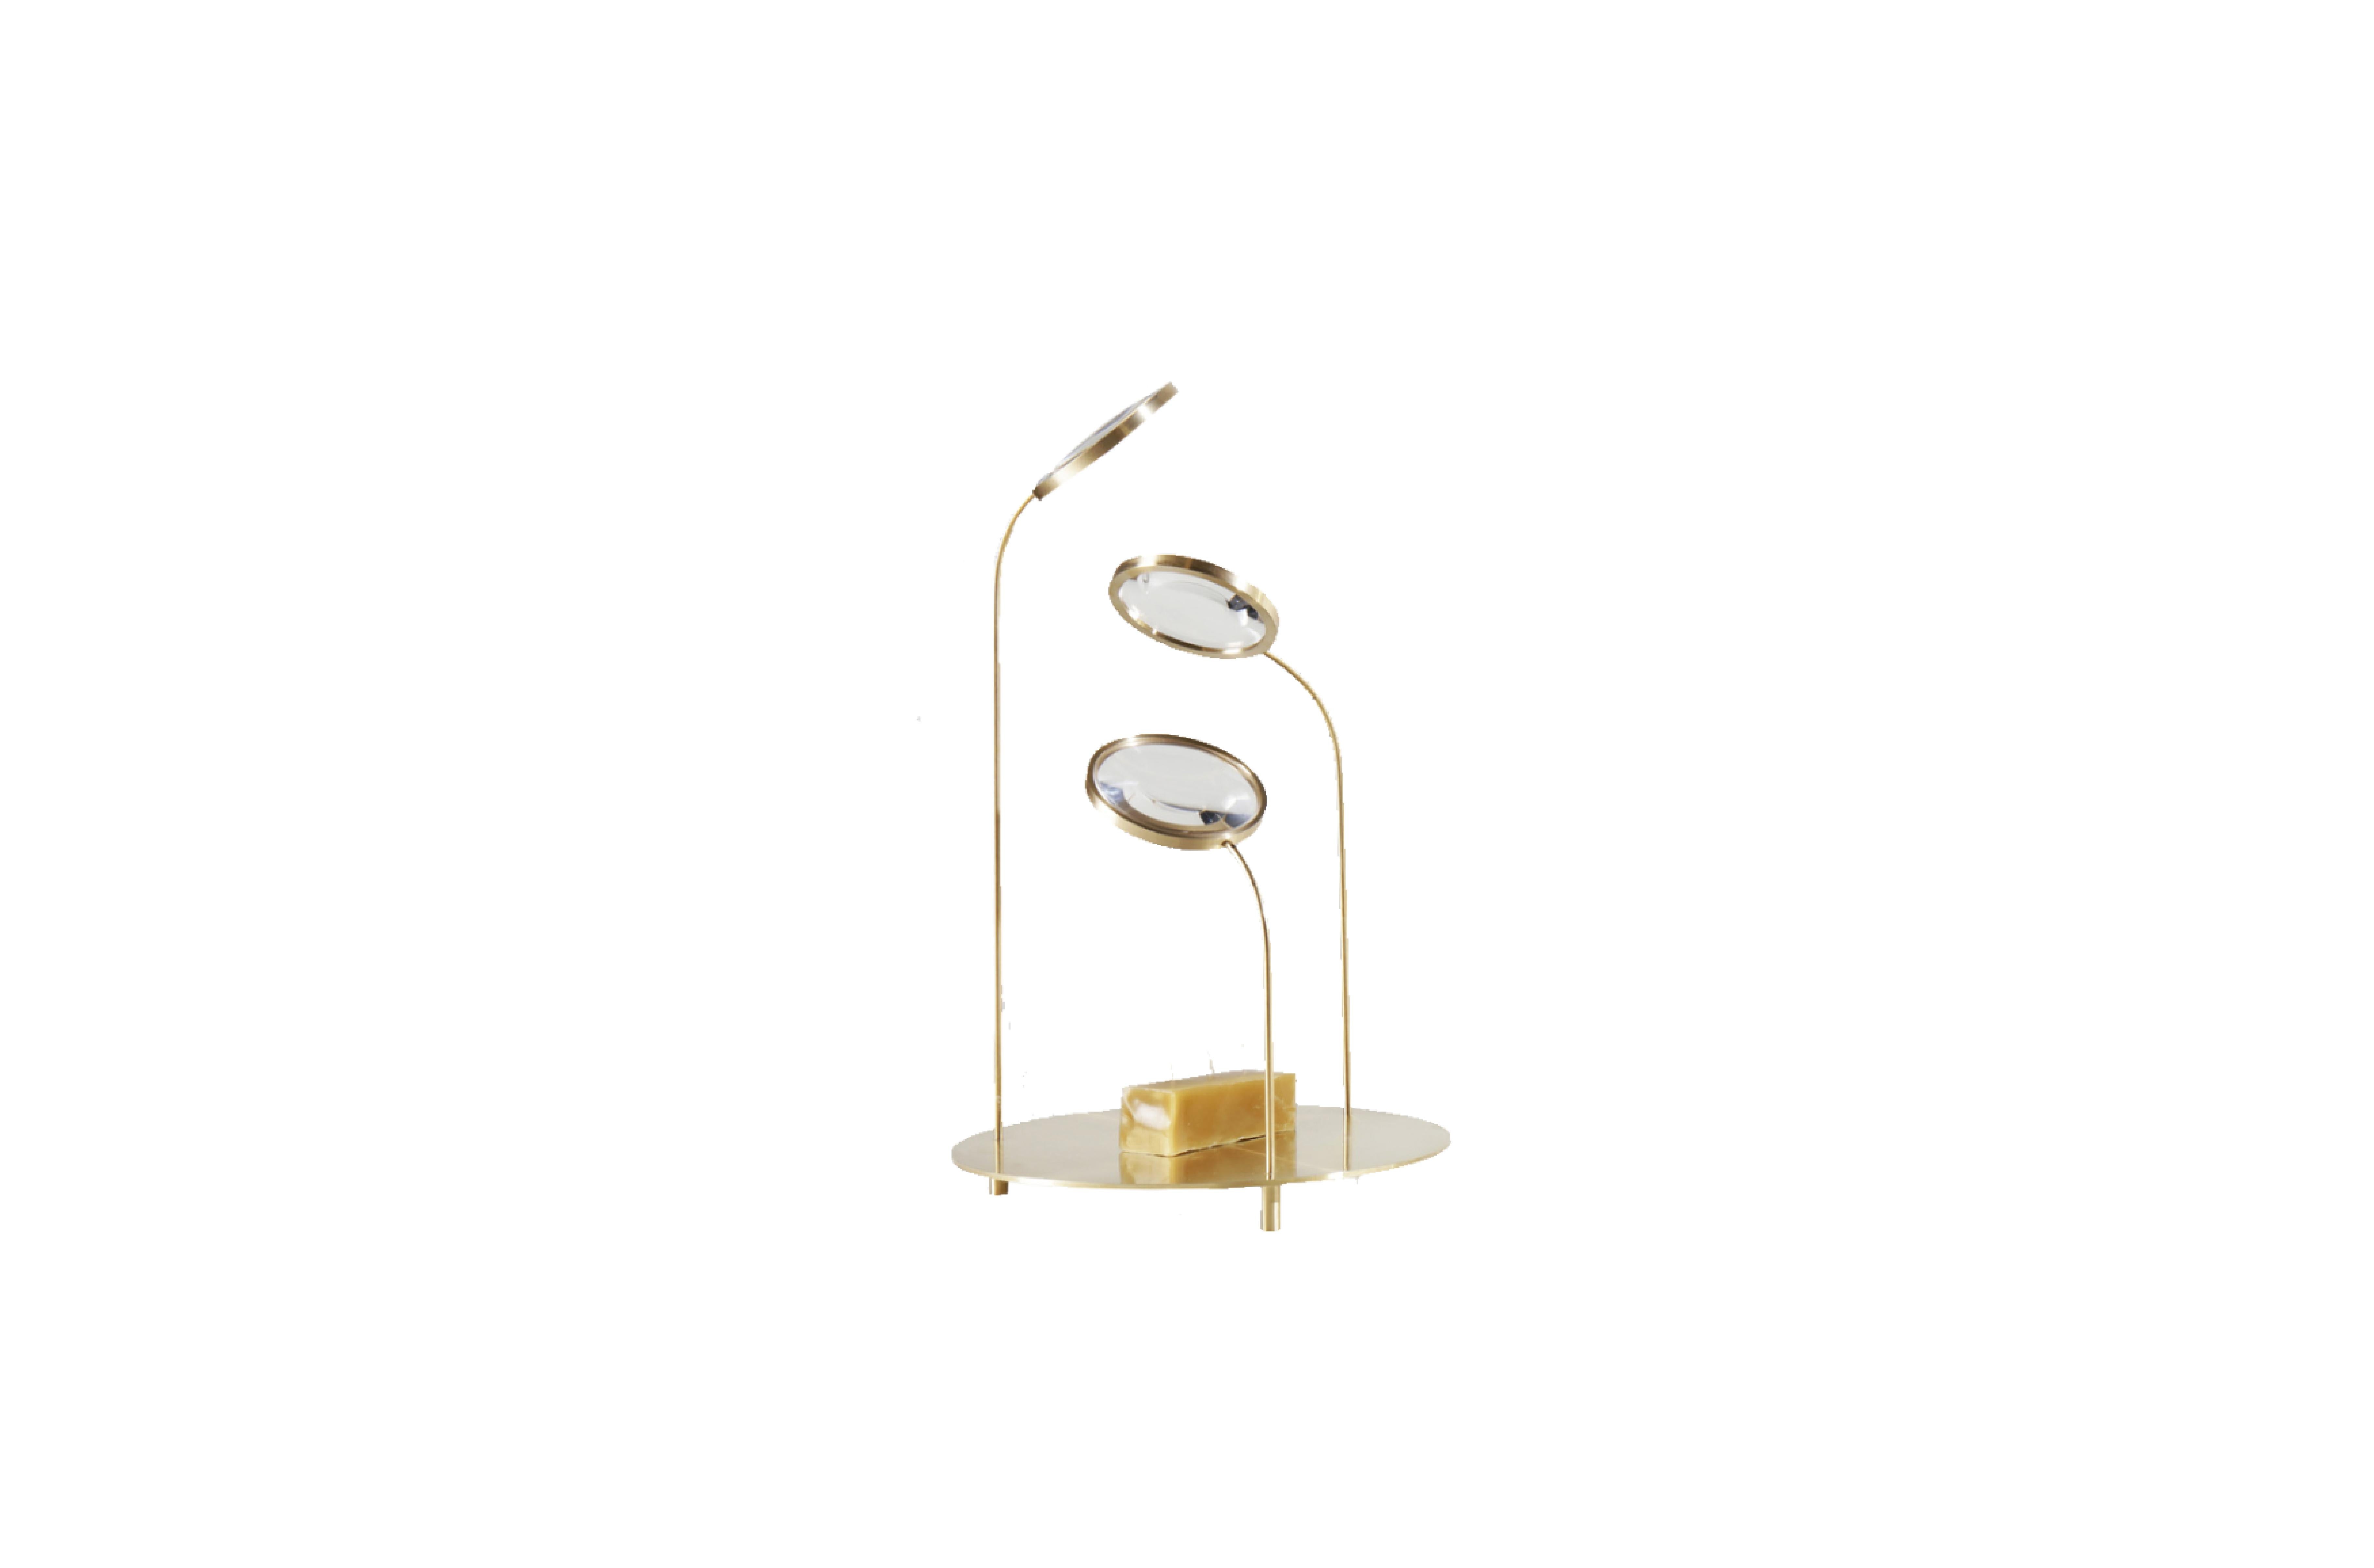 British Relativistic Objects Contemporary Light Accessories For Sale